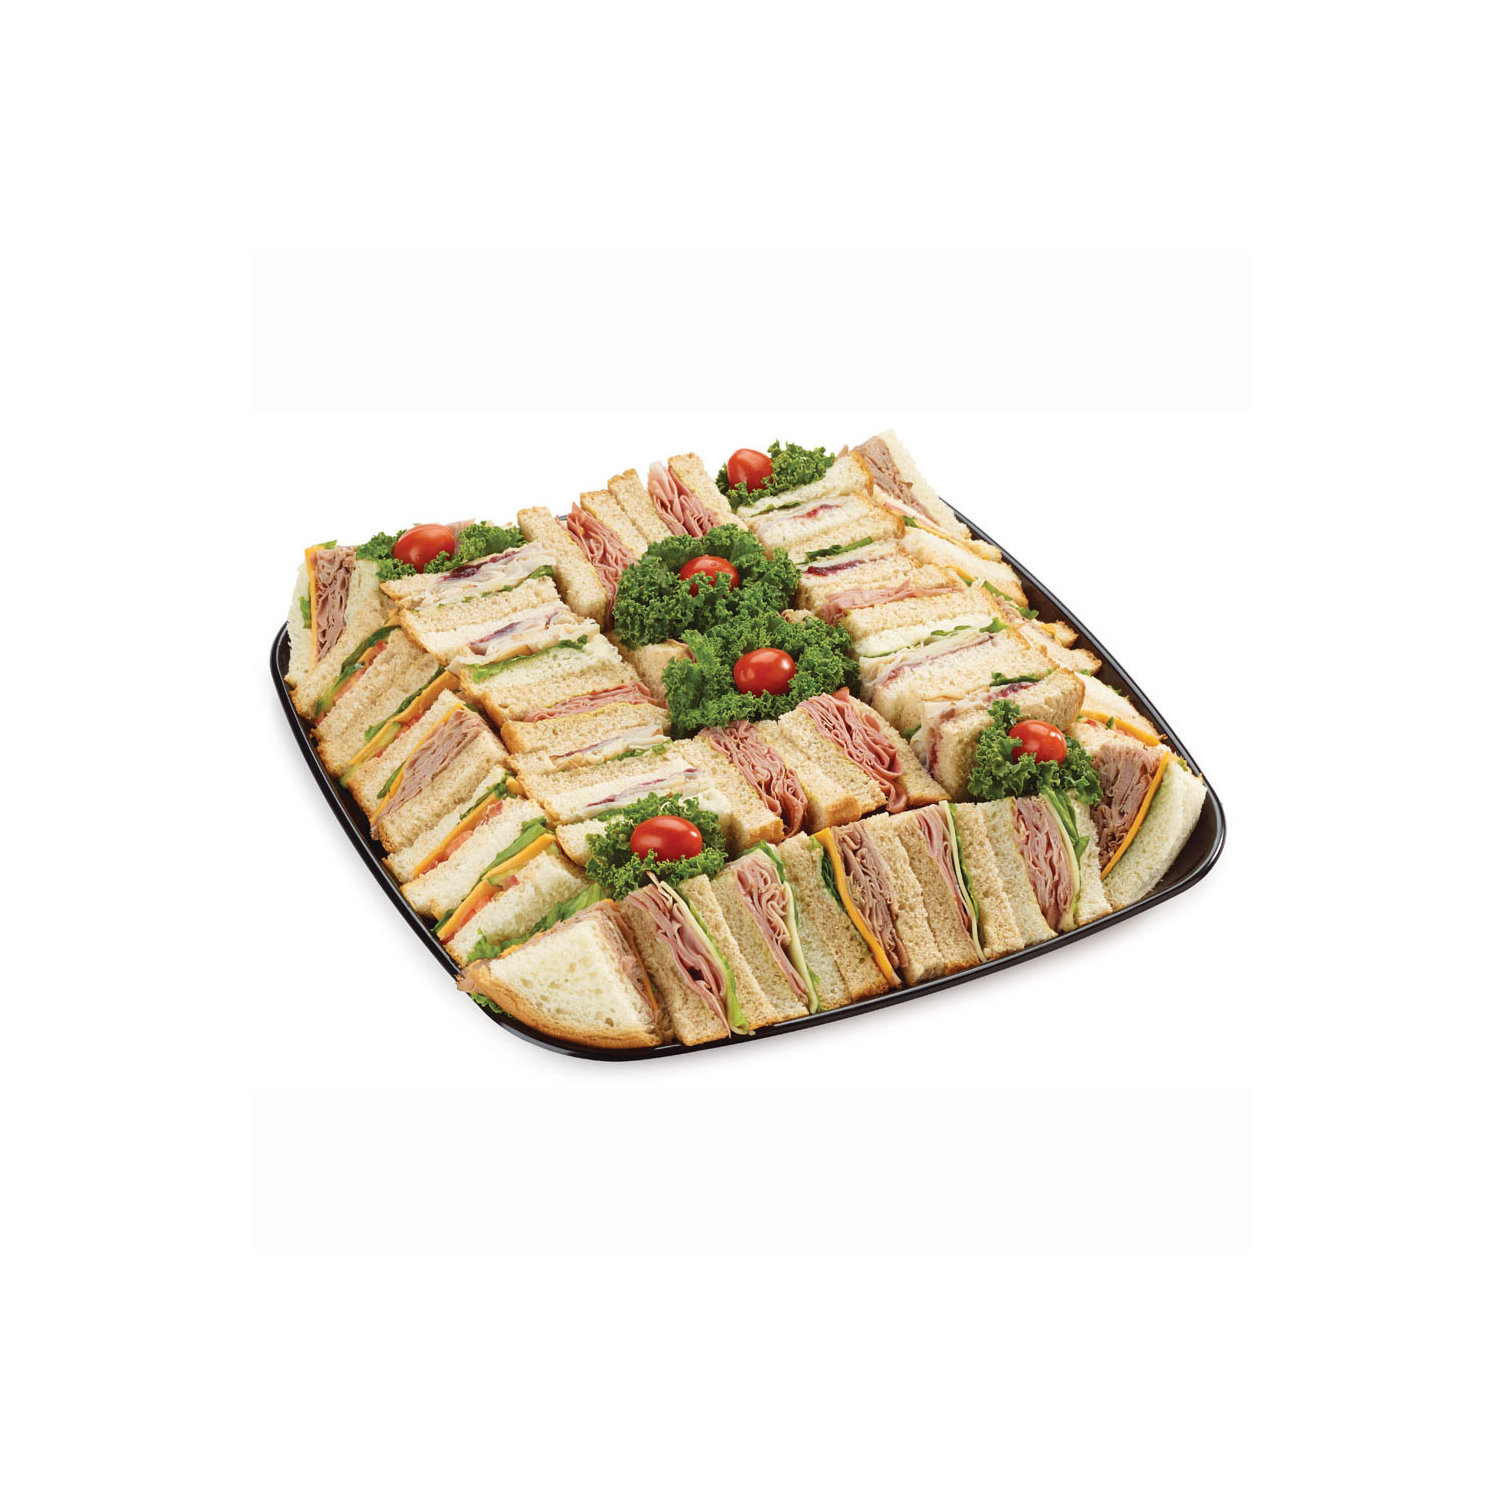 ebake Sandwich Platter Trays with Lids - Pack of 5 Reusable